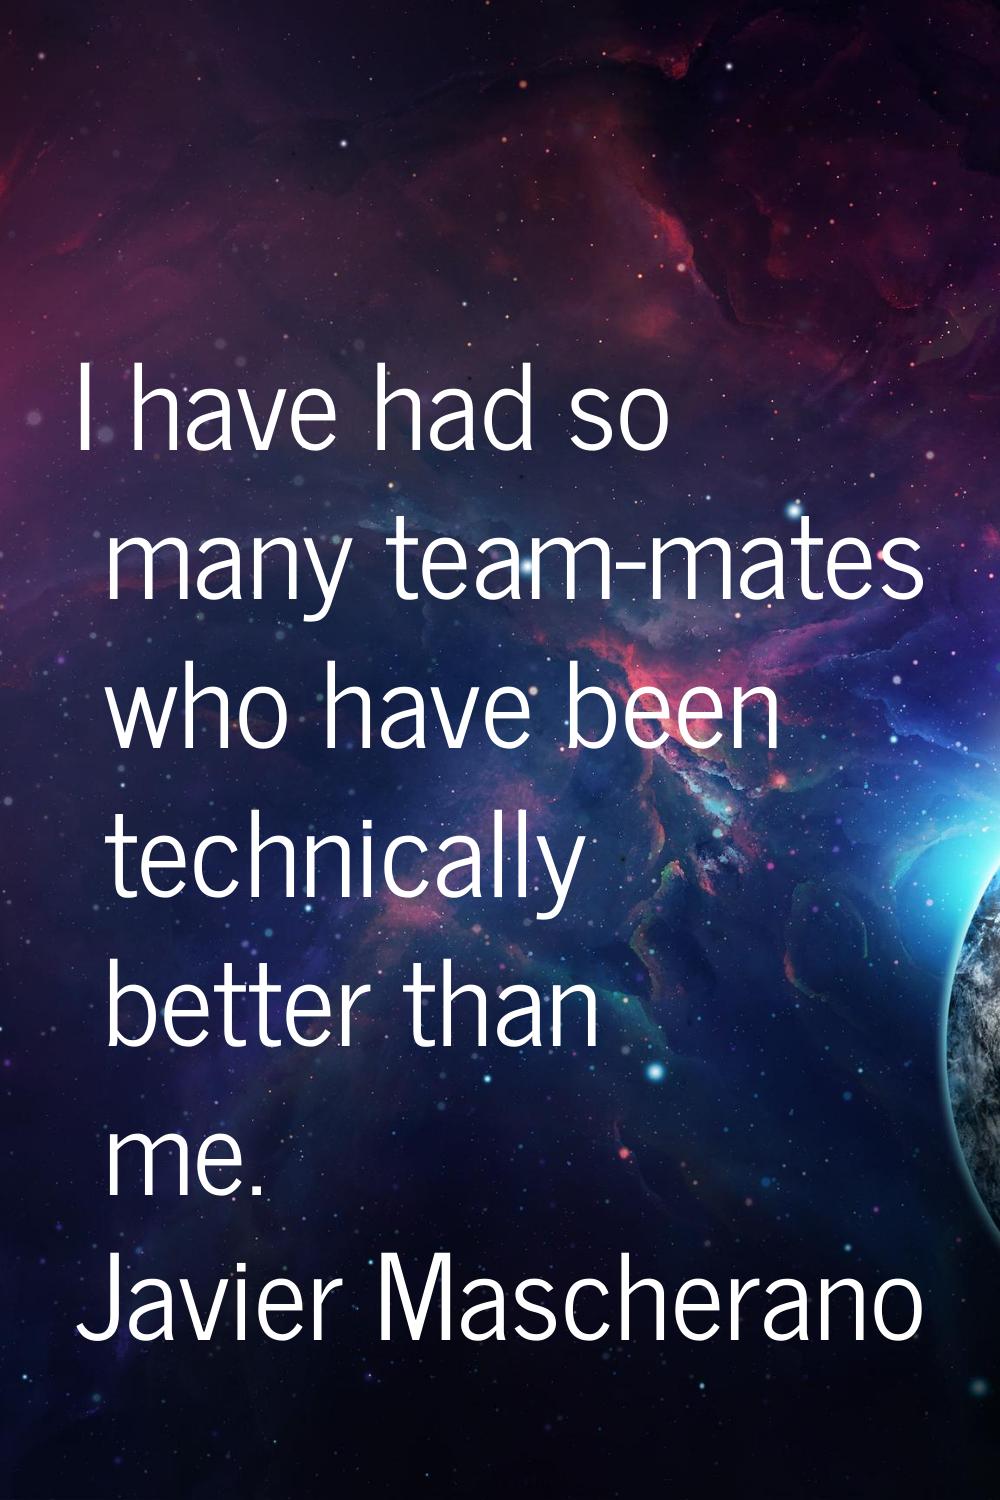 I have had so many team-mates who have been technically better than me.